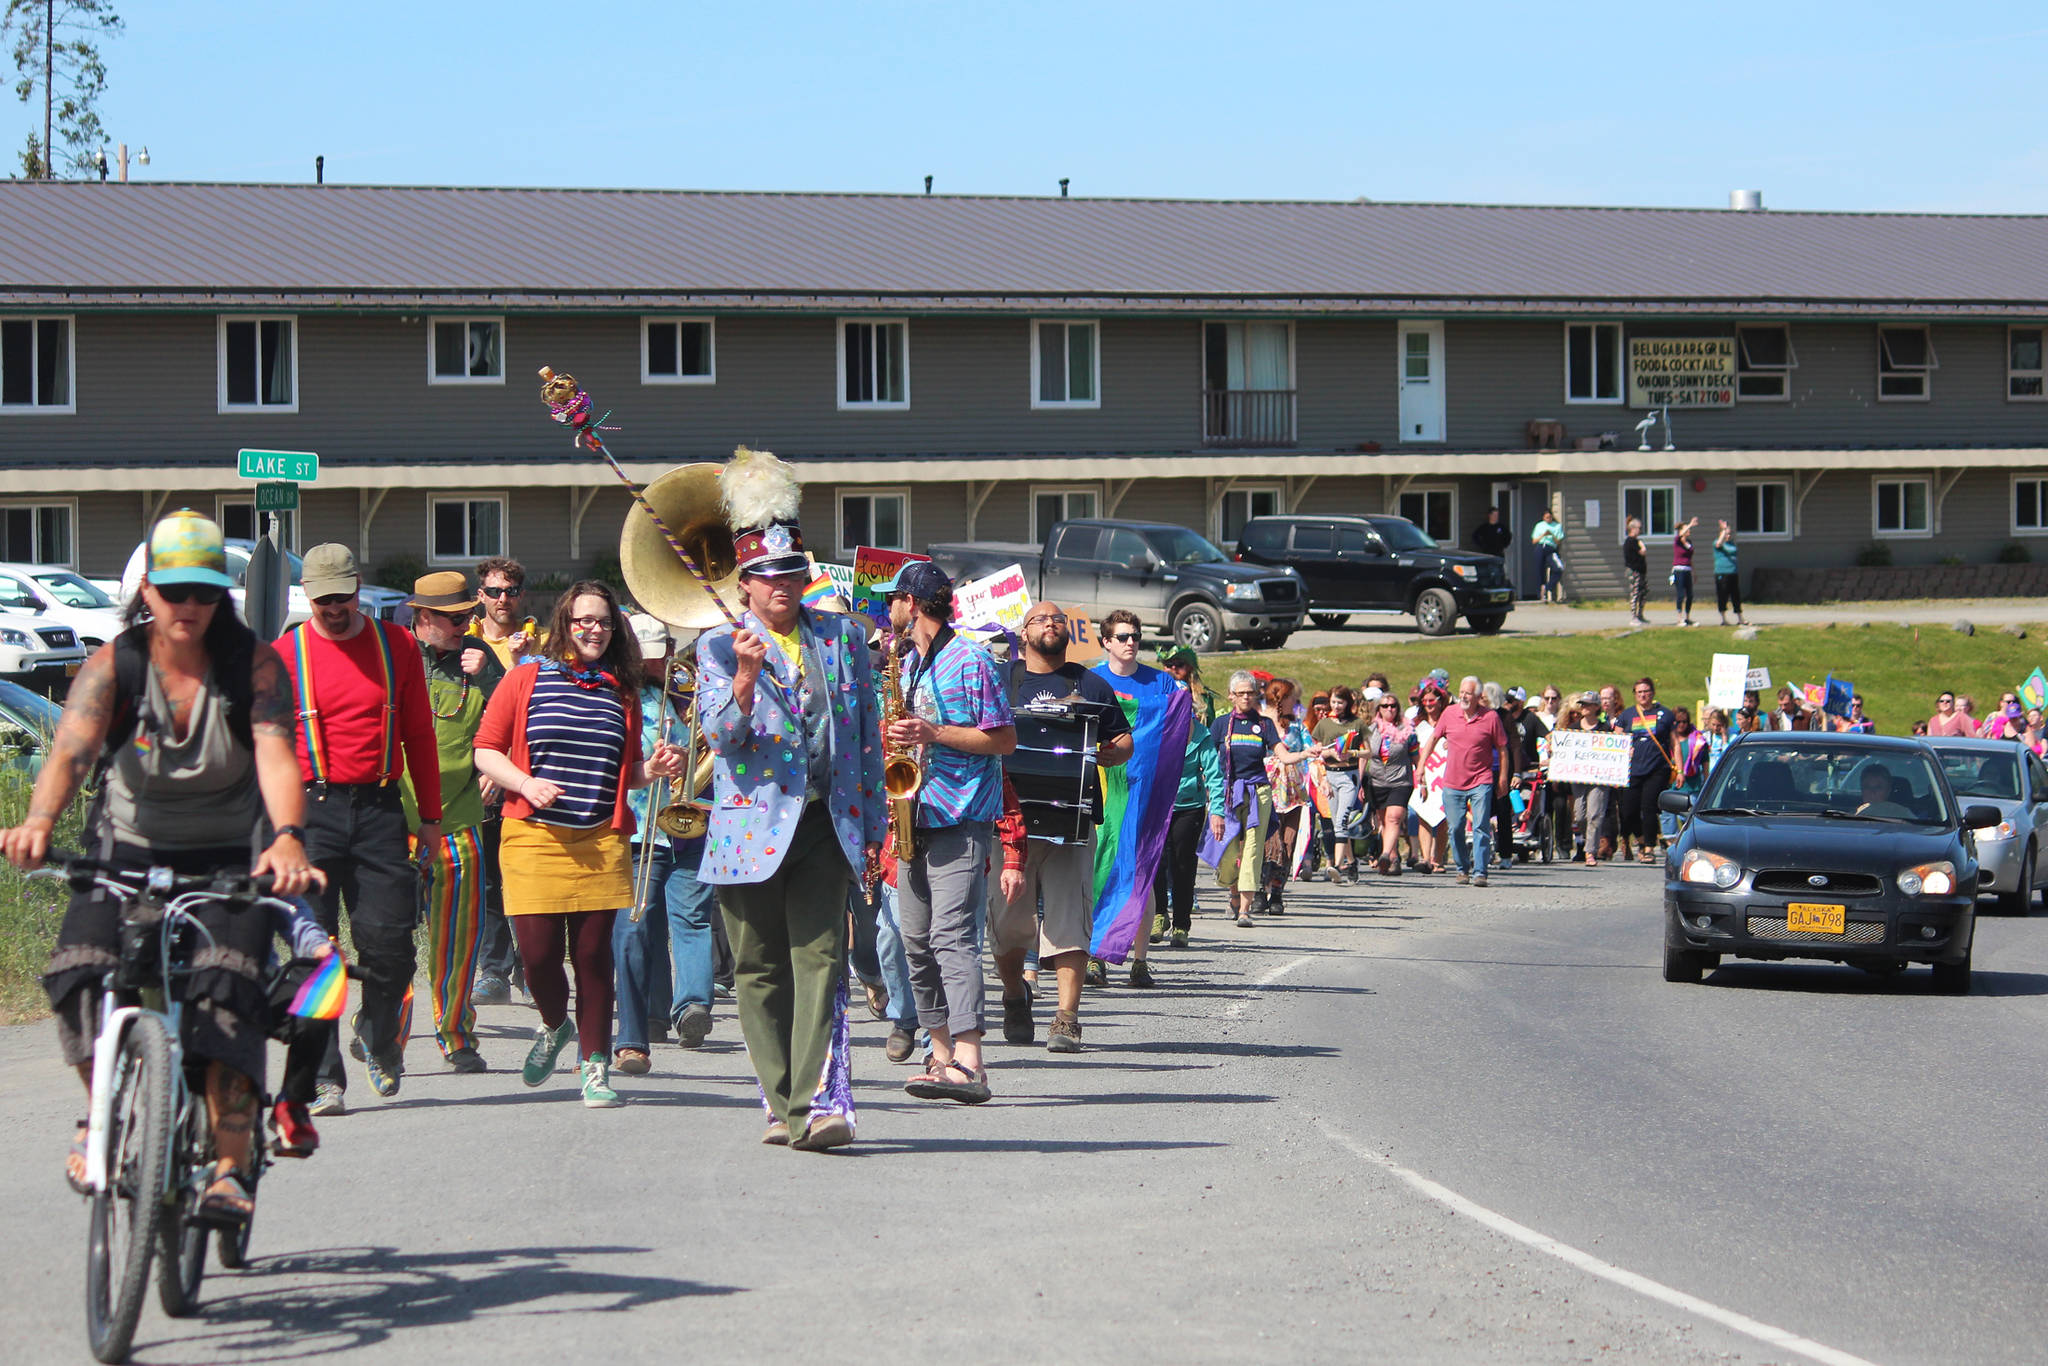 Participants in this year’s Pride Walk make their way up Ocean Drive on Saturday, June 22, 2019 in Homer, Alaska. (Photo by Megan Pacer/Homer News)